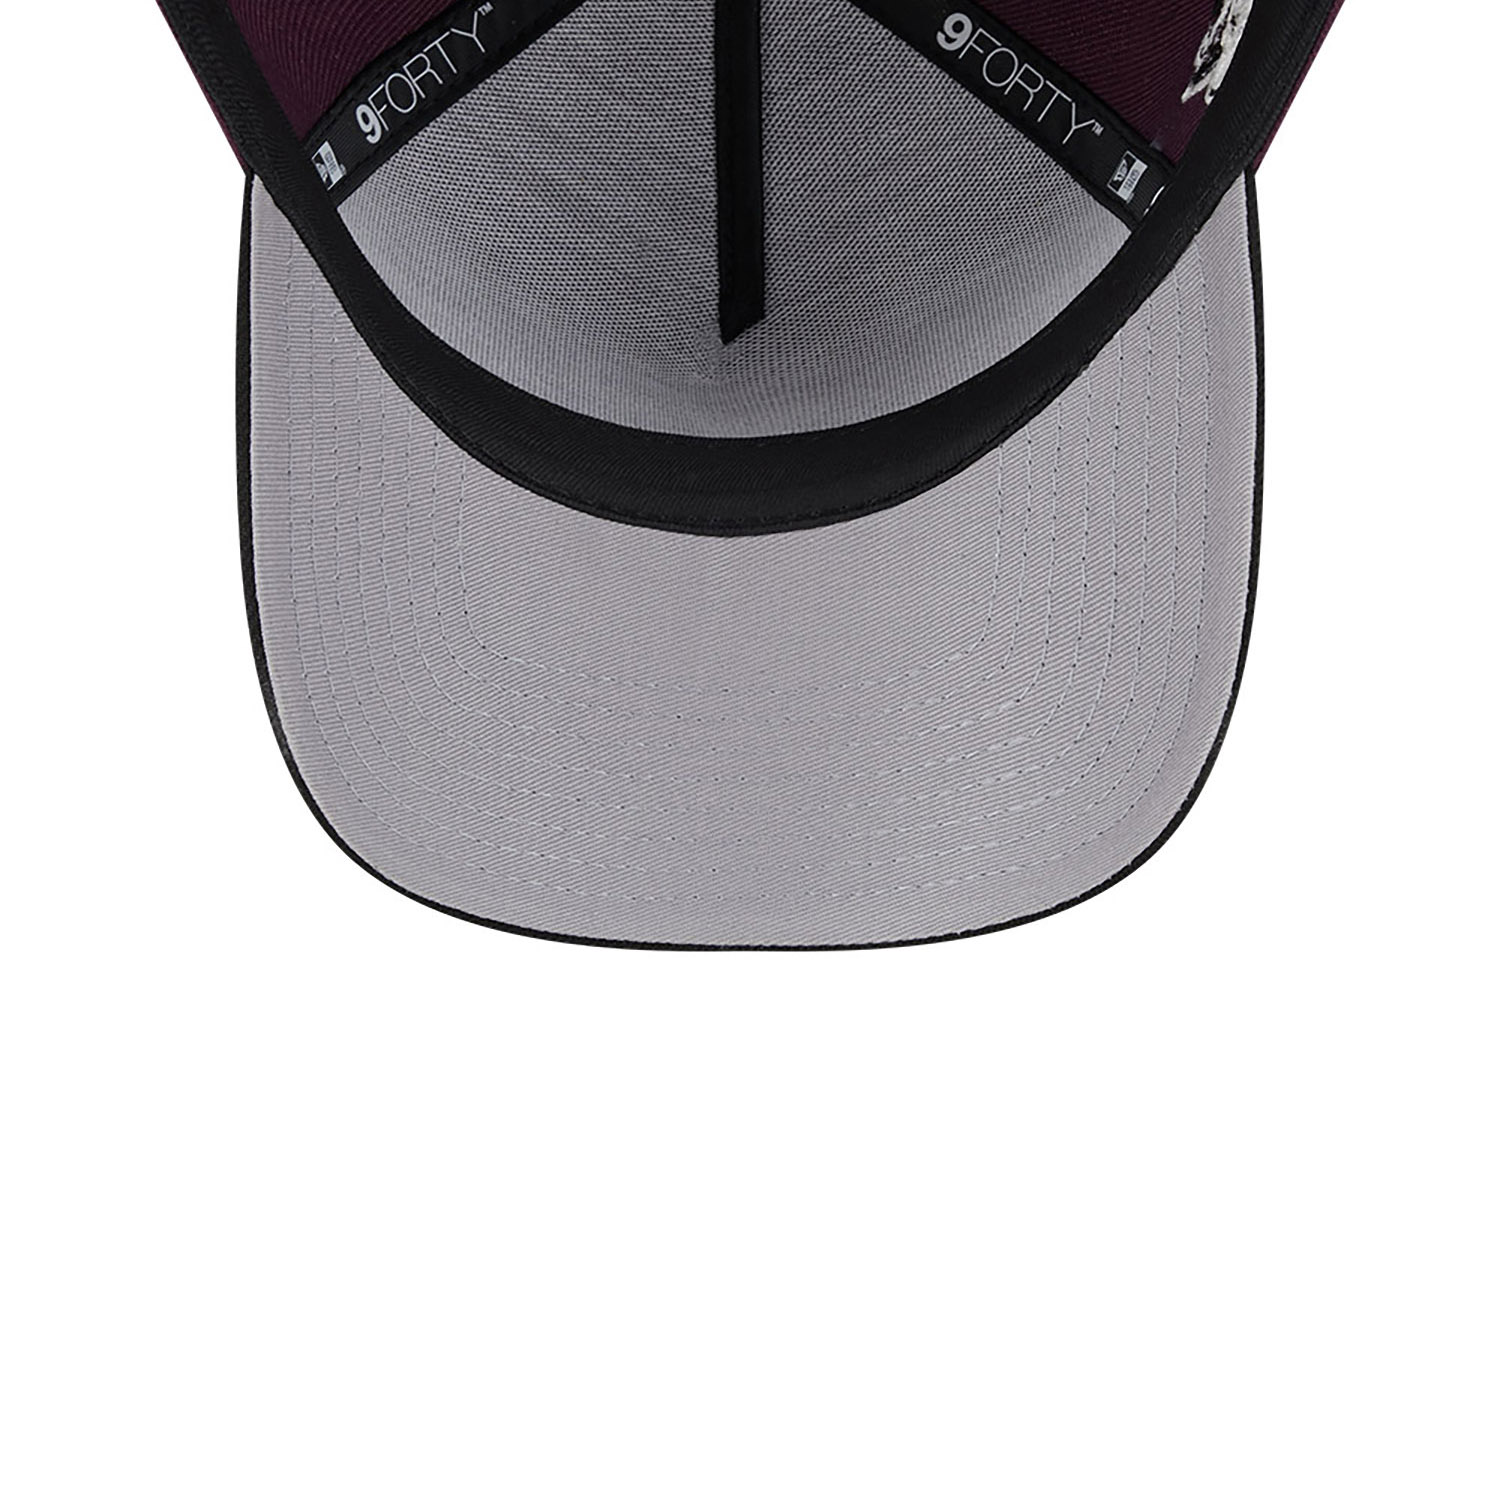 New York Yankees Two-Tone Dark Purple 9FORTY A-Frame Adjustable Cap